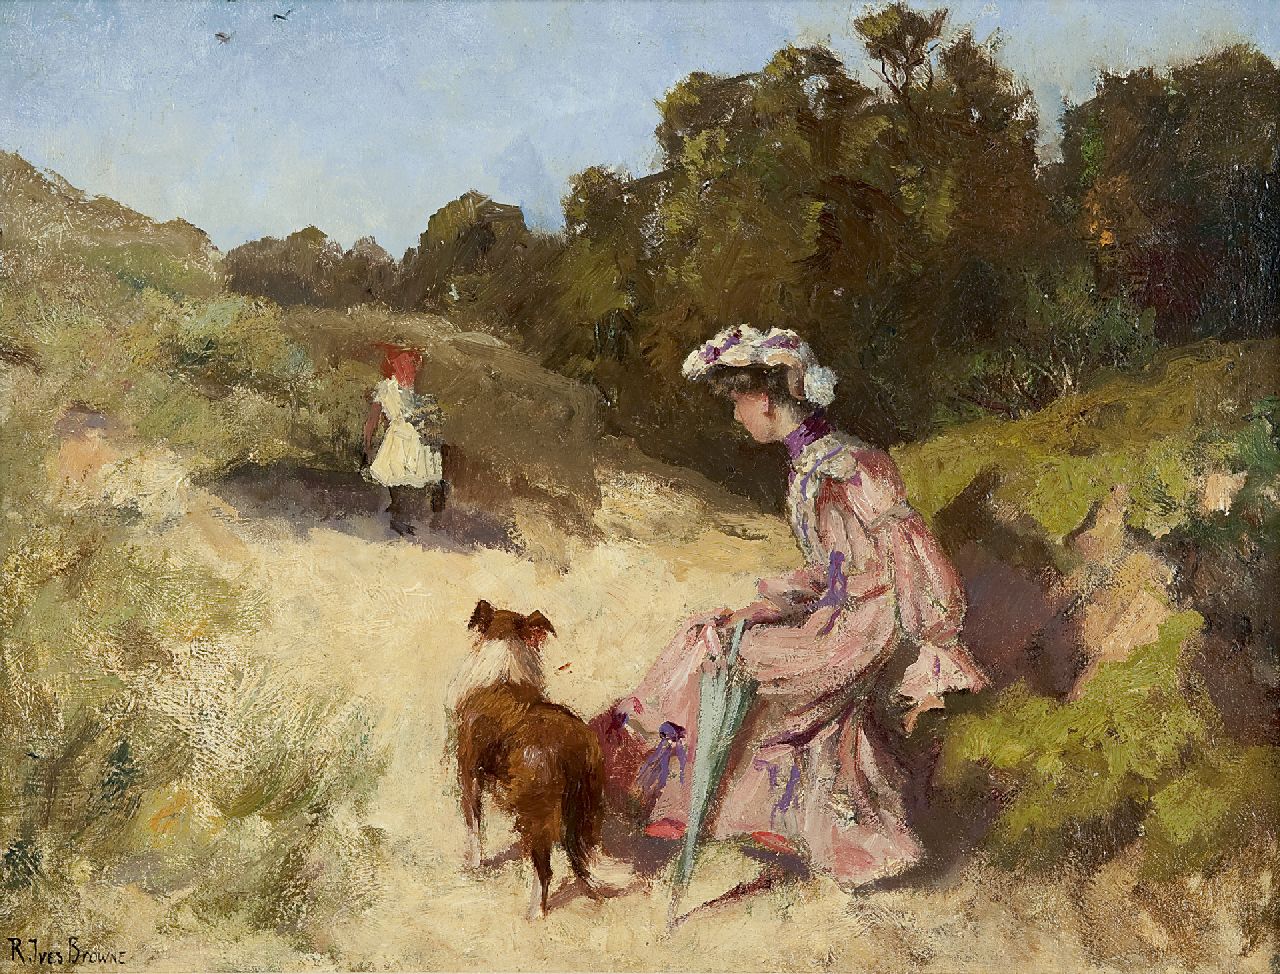 Ives Browne R.  | Robert Ives Browne, A summer day in the dunes, Öl auf Leinwand  auf Holzfaser 34,2 x 46,0 cm, signed l.l.